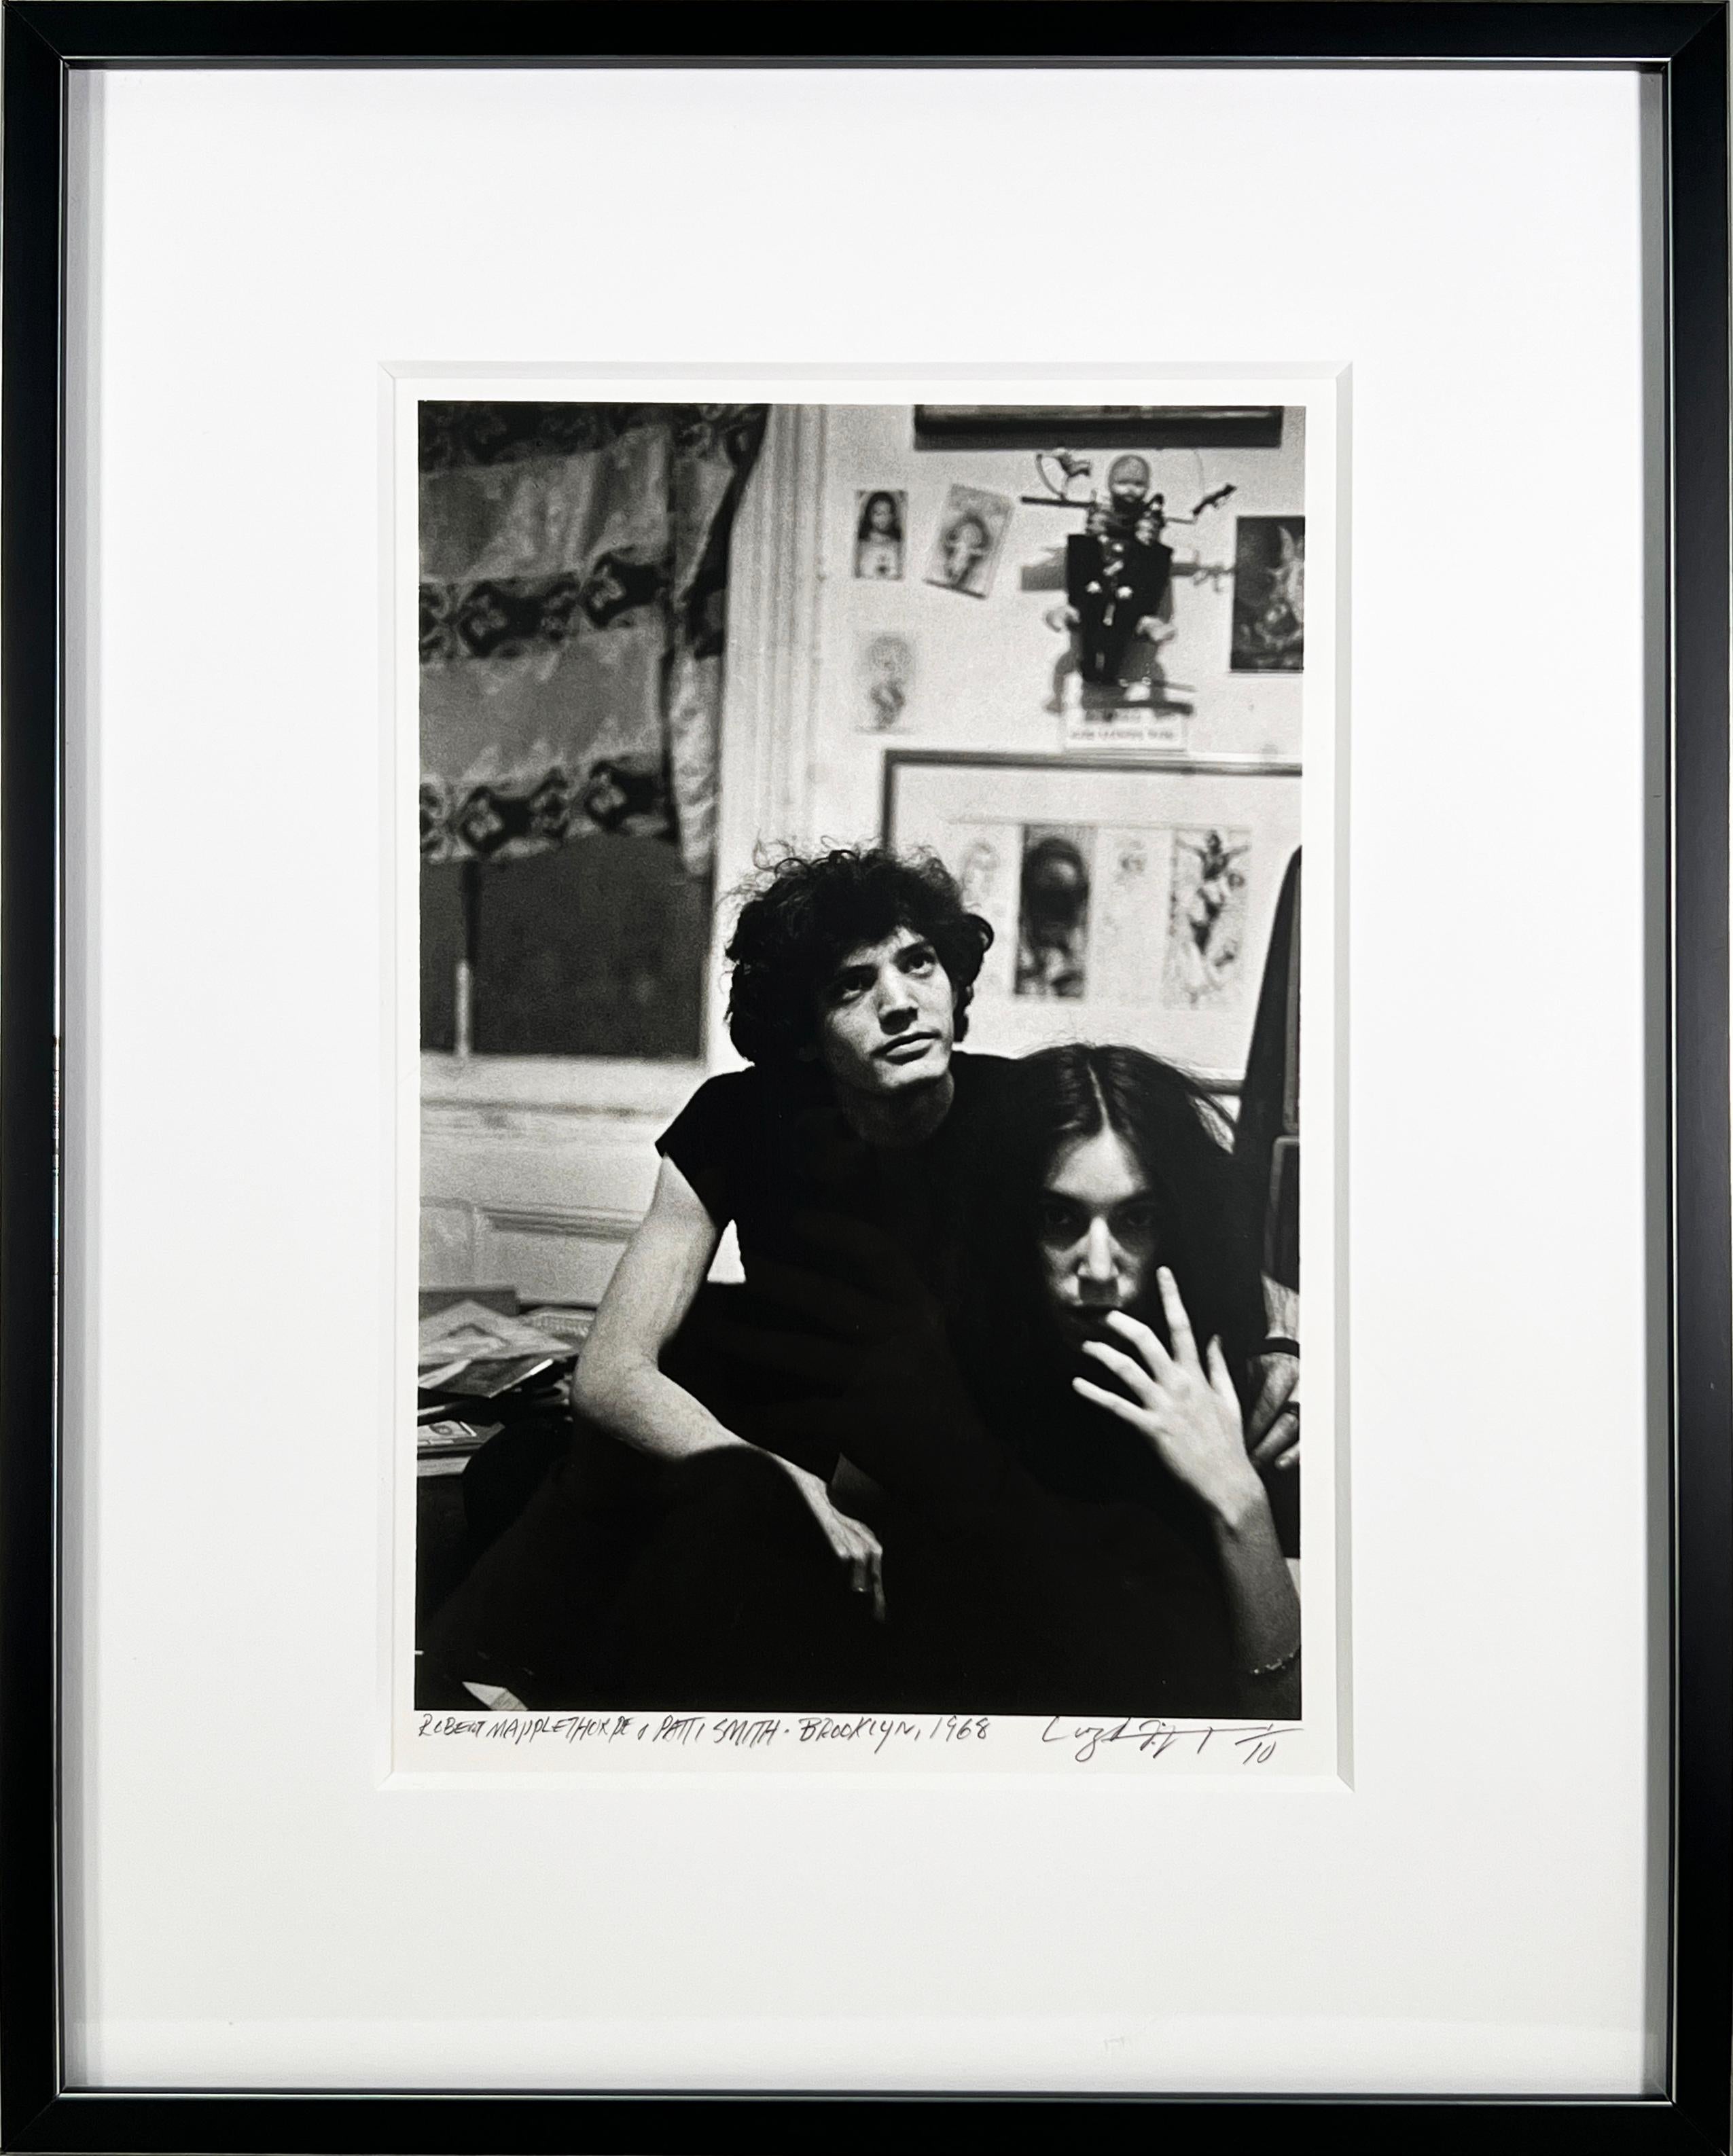 Patti Smith and Robert Mapplethorpe in Brooklyn